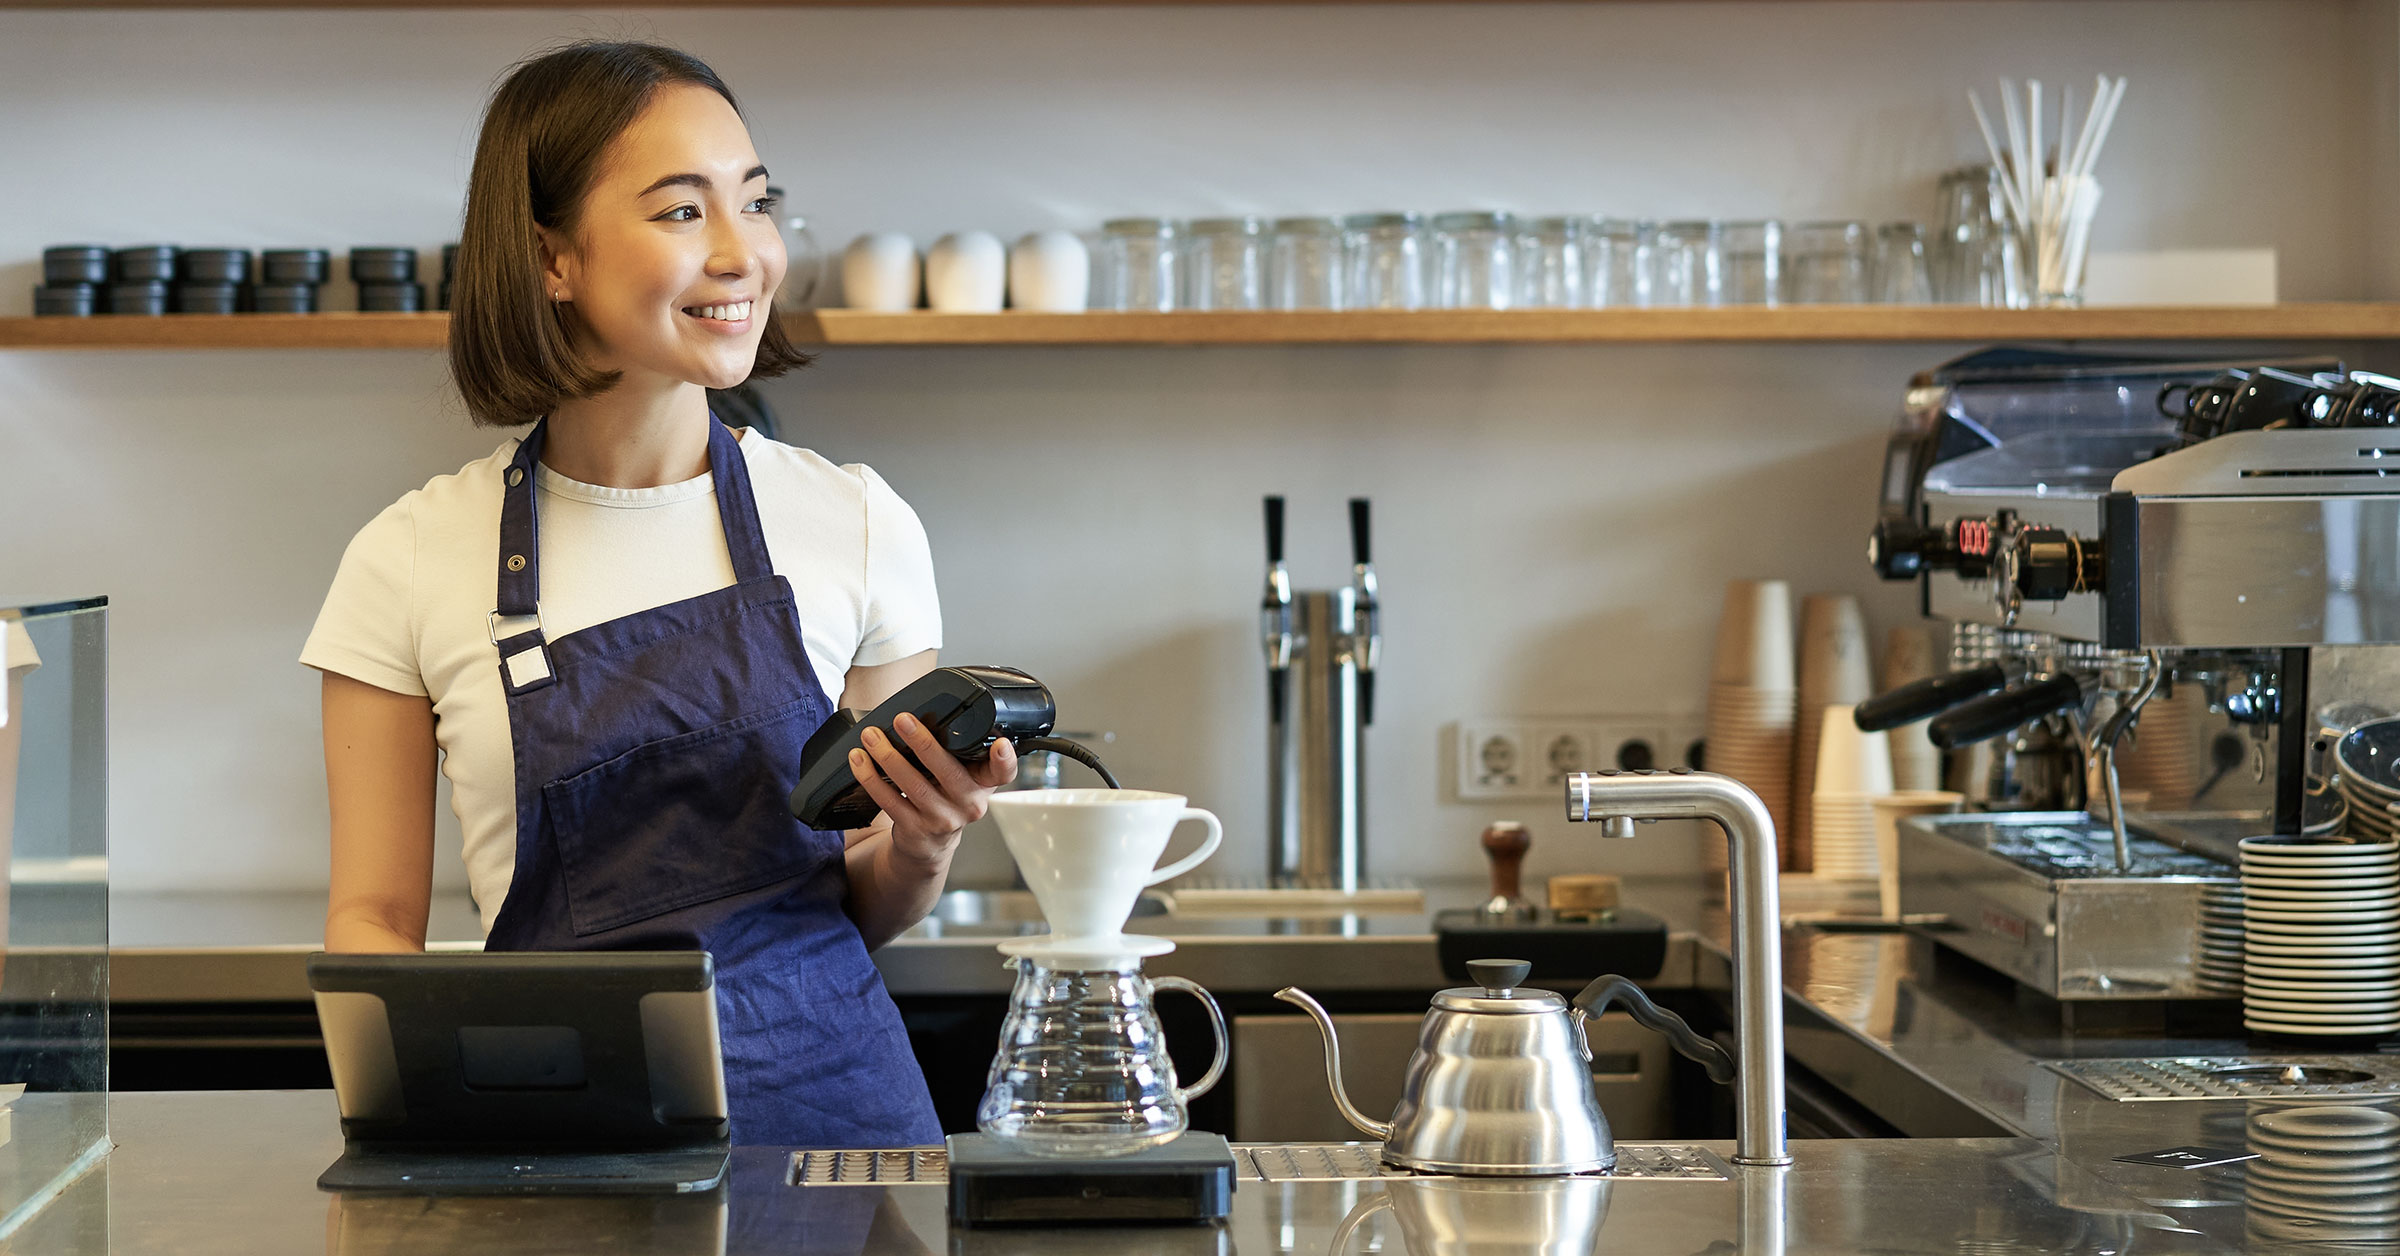 A female barista at the bar holding a payment terminal with a nice smile on her face.